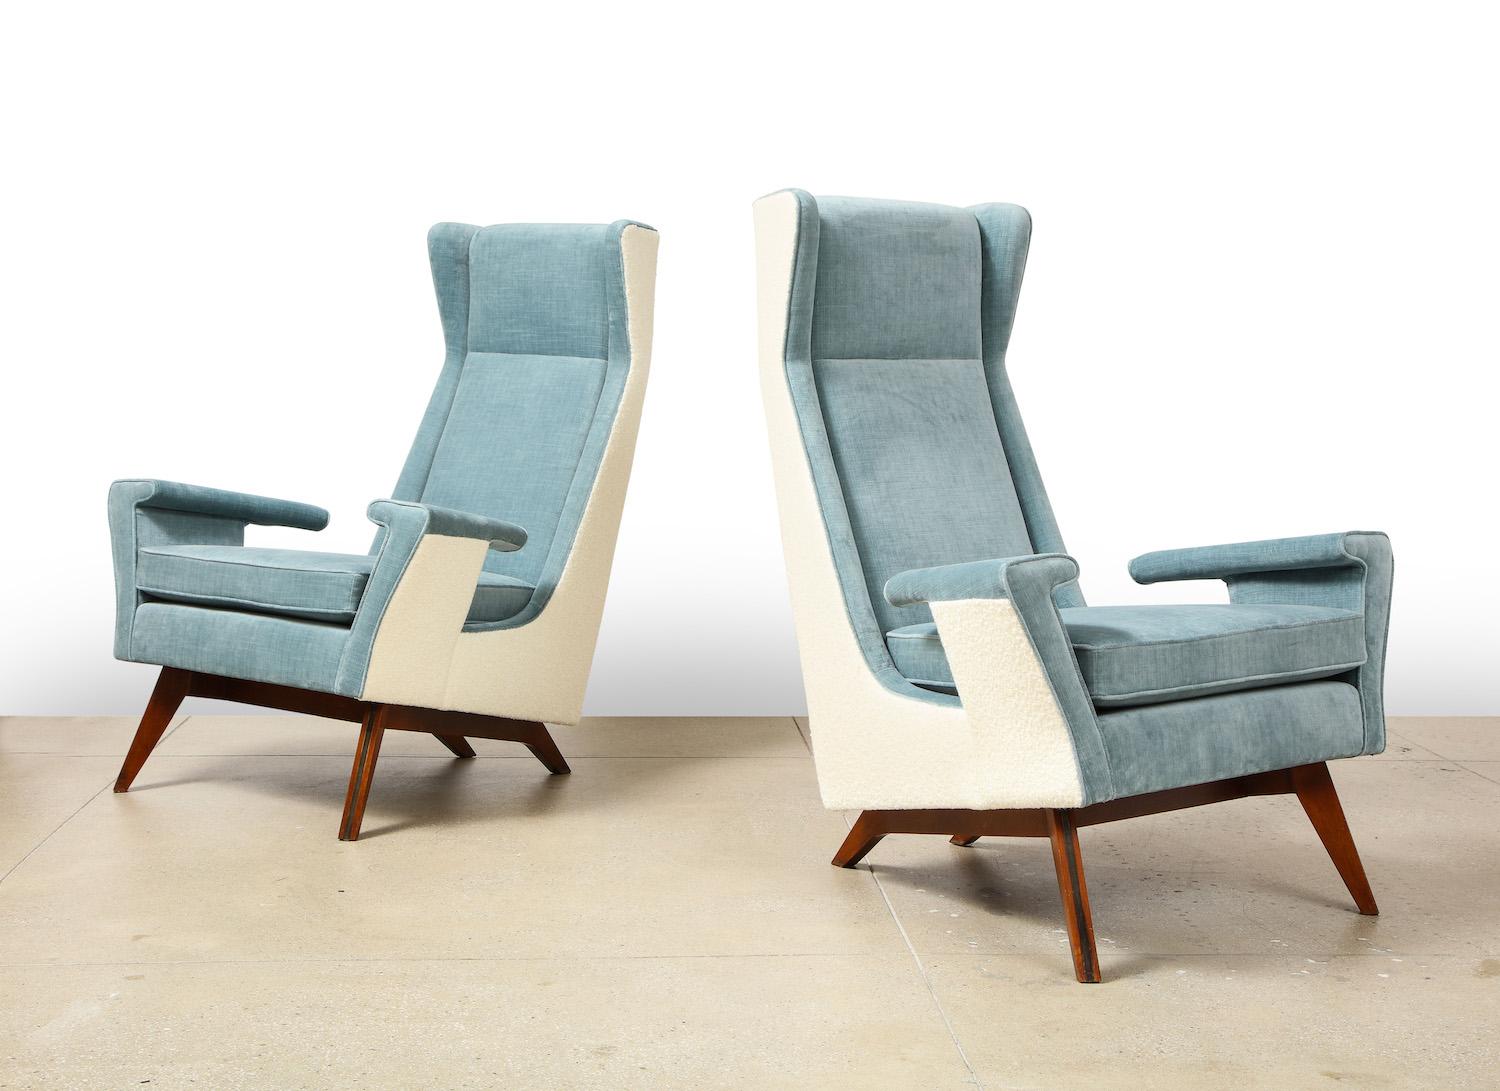 Upholstery, beech, enameled steel. Extravagant design of generous proportions and superb detailing. Levi-Montalcini was known to have only created furniture for a handful of his projects. Never mass produced and always custom made.